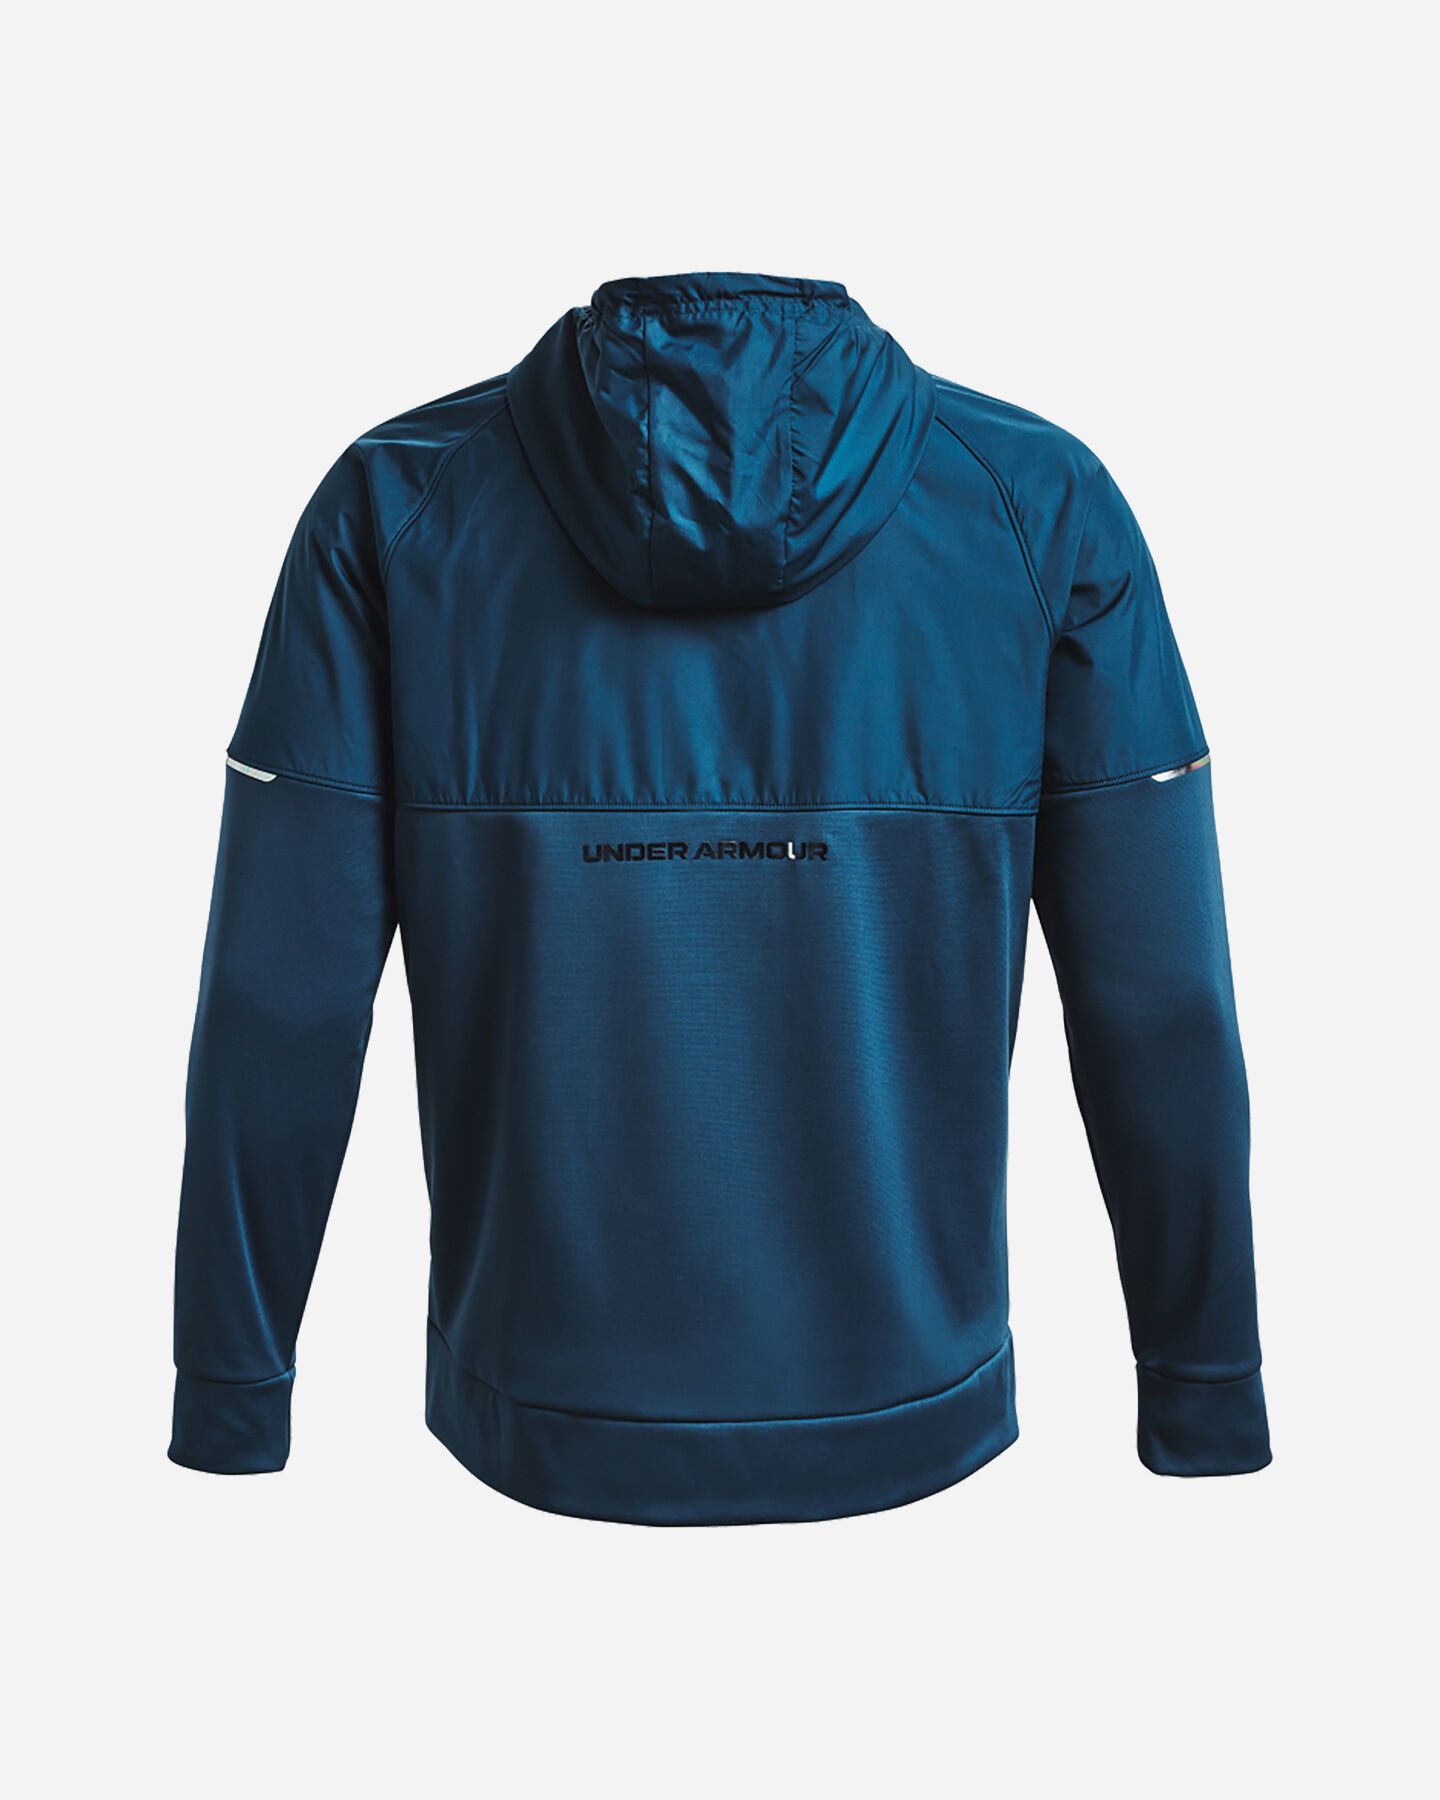  Felpa UNDER ARMOUR AF STORM M S5459616|0437|XS scatto 1